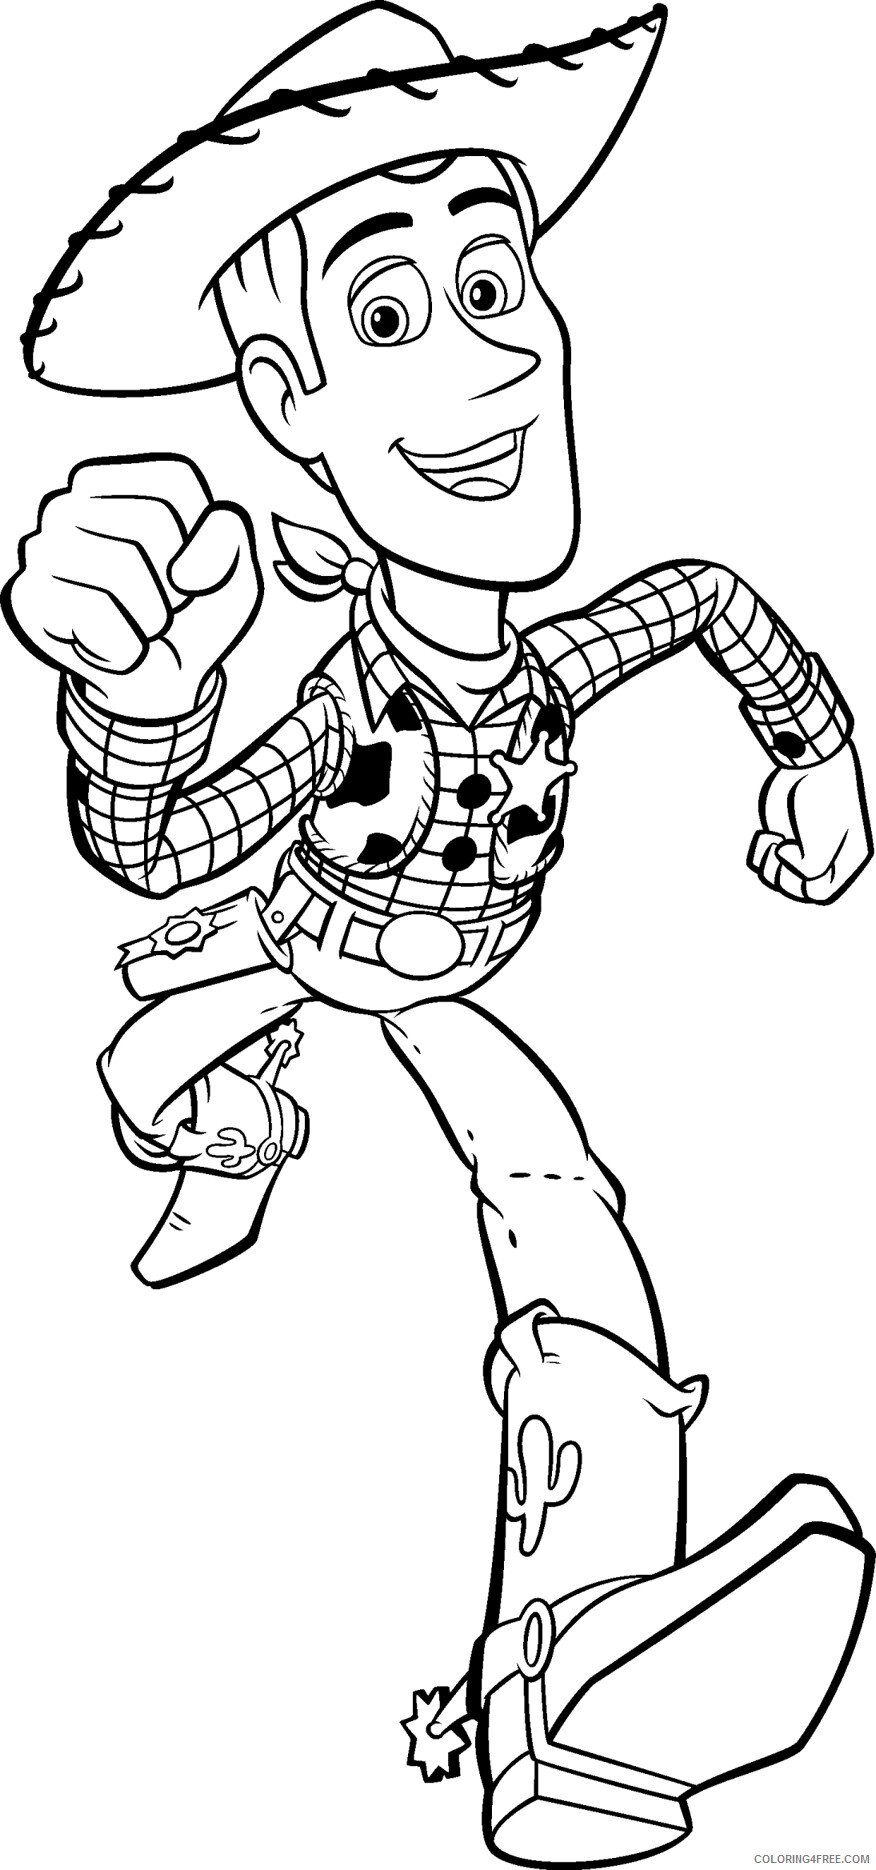 Toy Story Coloring Pages TV Film Disney Toy Story Printable 2020 10357 Coloring4free